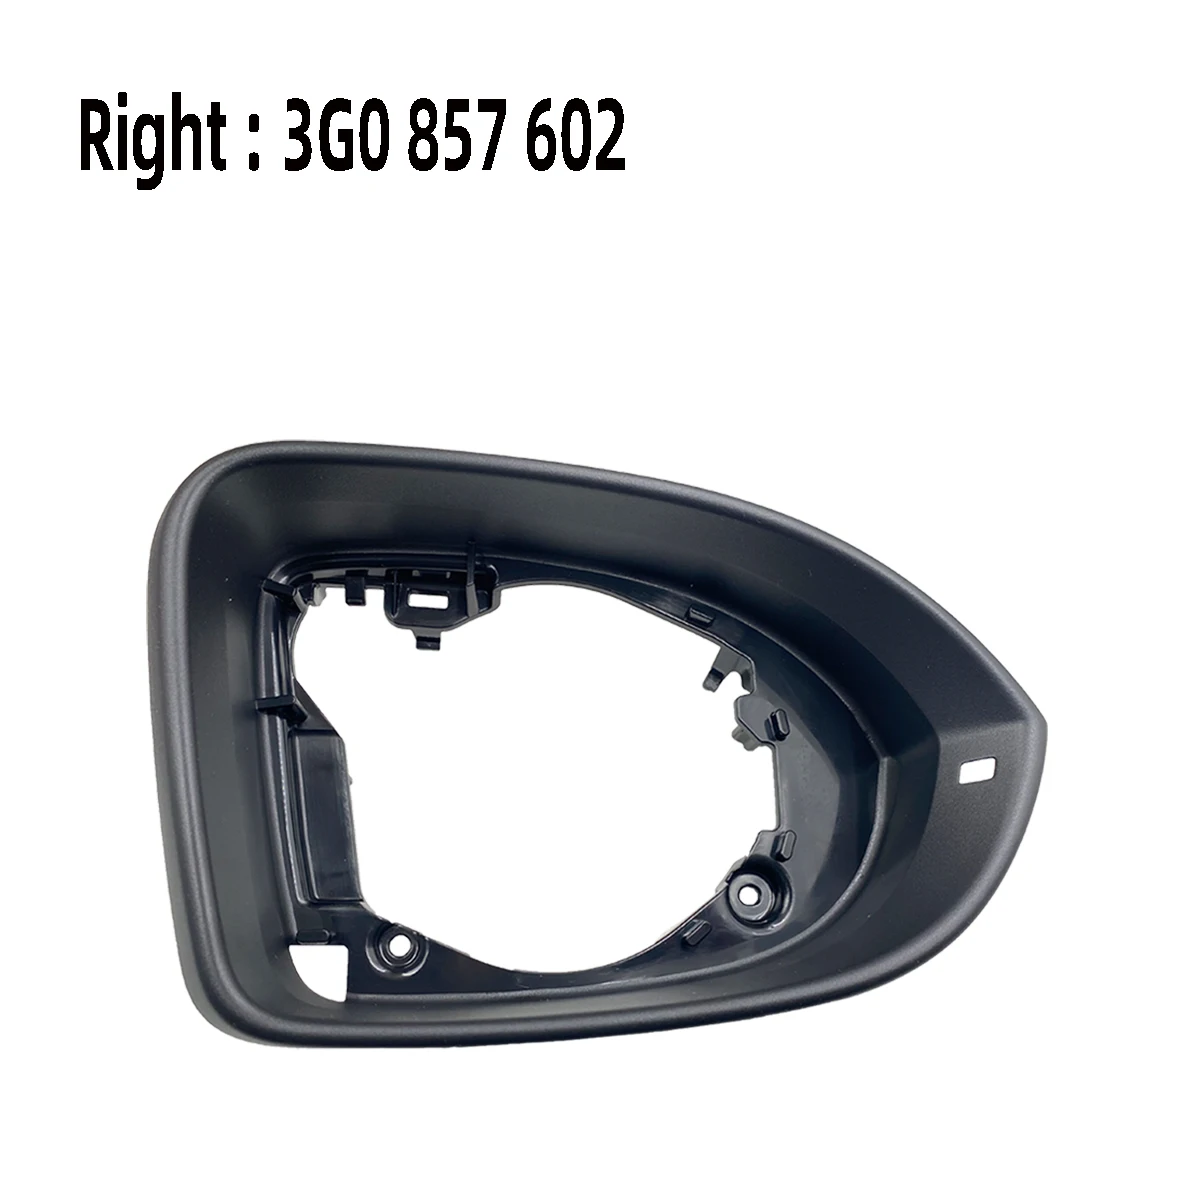 

3G0857602 New LHD Front Rearview Mirror Housing Cover Mirror Frame For Volkswagen Passat B8 2017-2021 CC 2019-2021 3G0857601